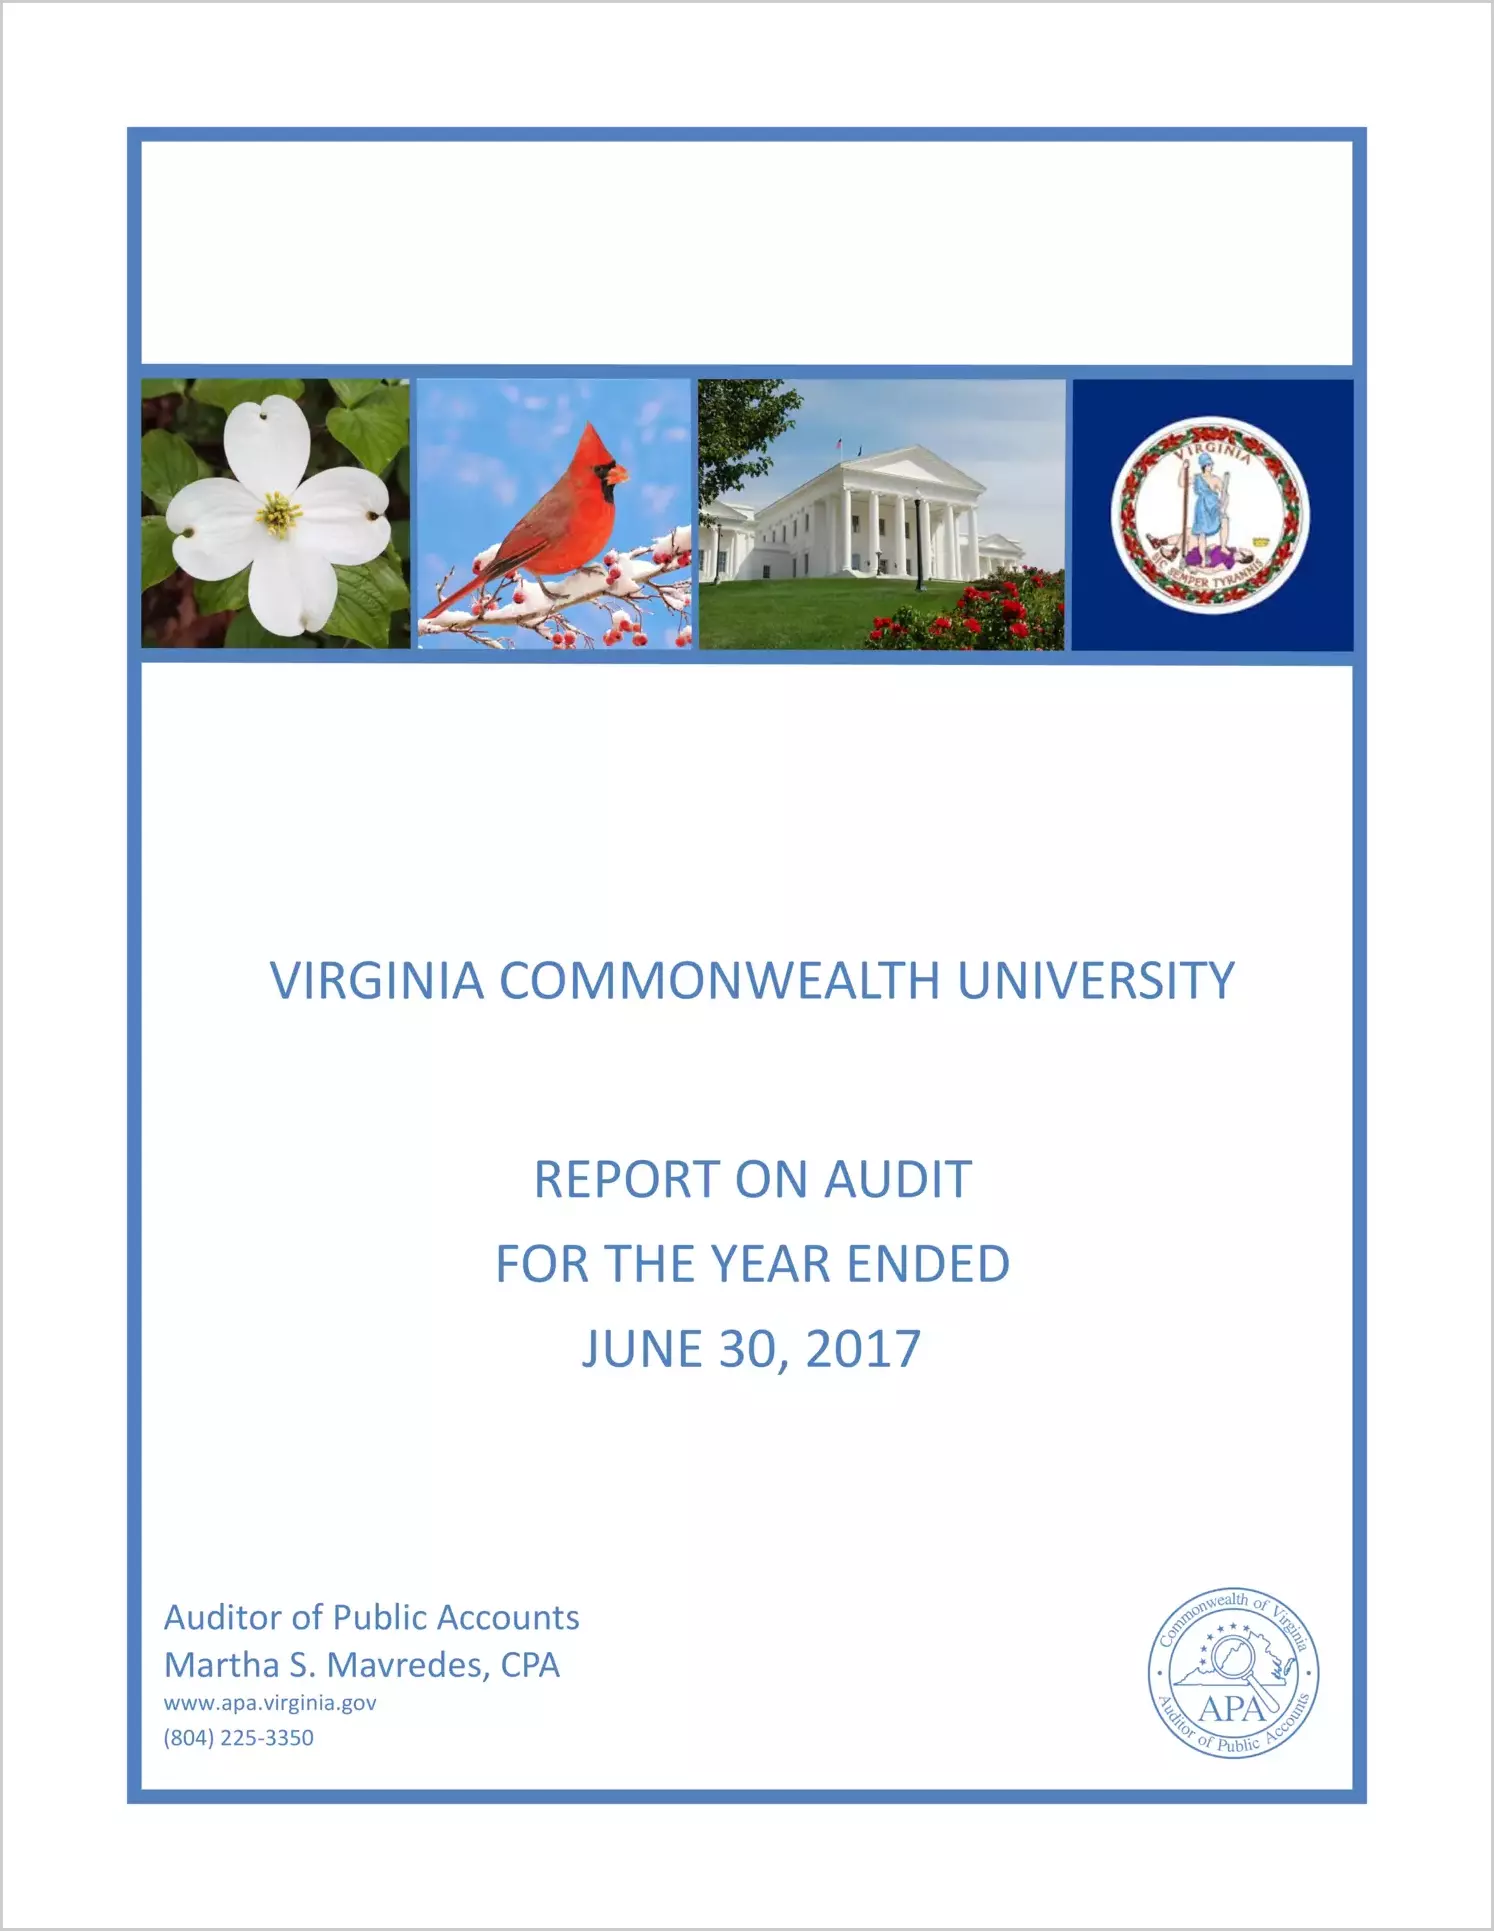 Virginia Commonwealth University for the year ended June 30, 2017